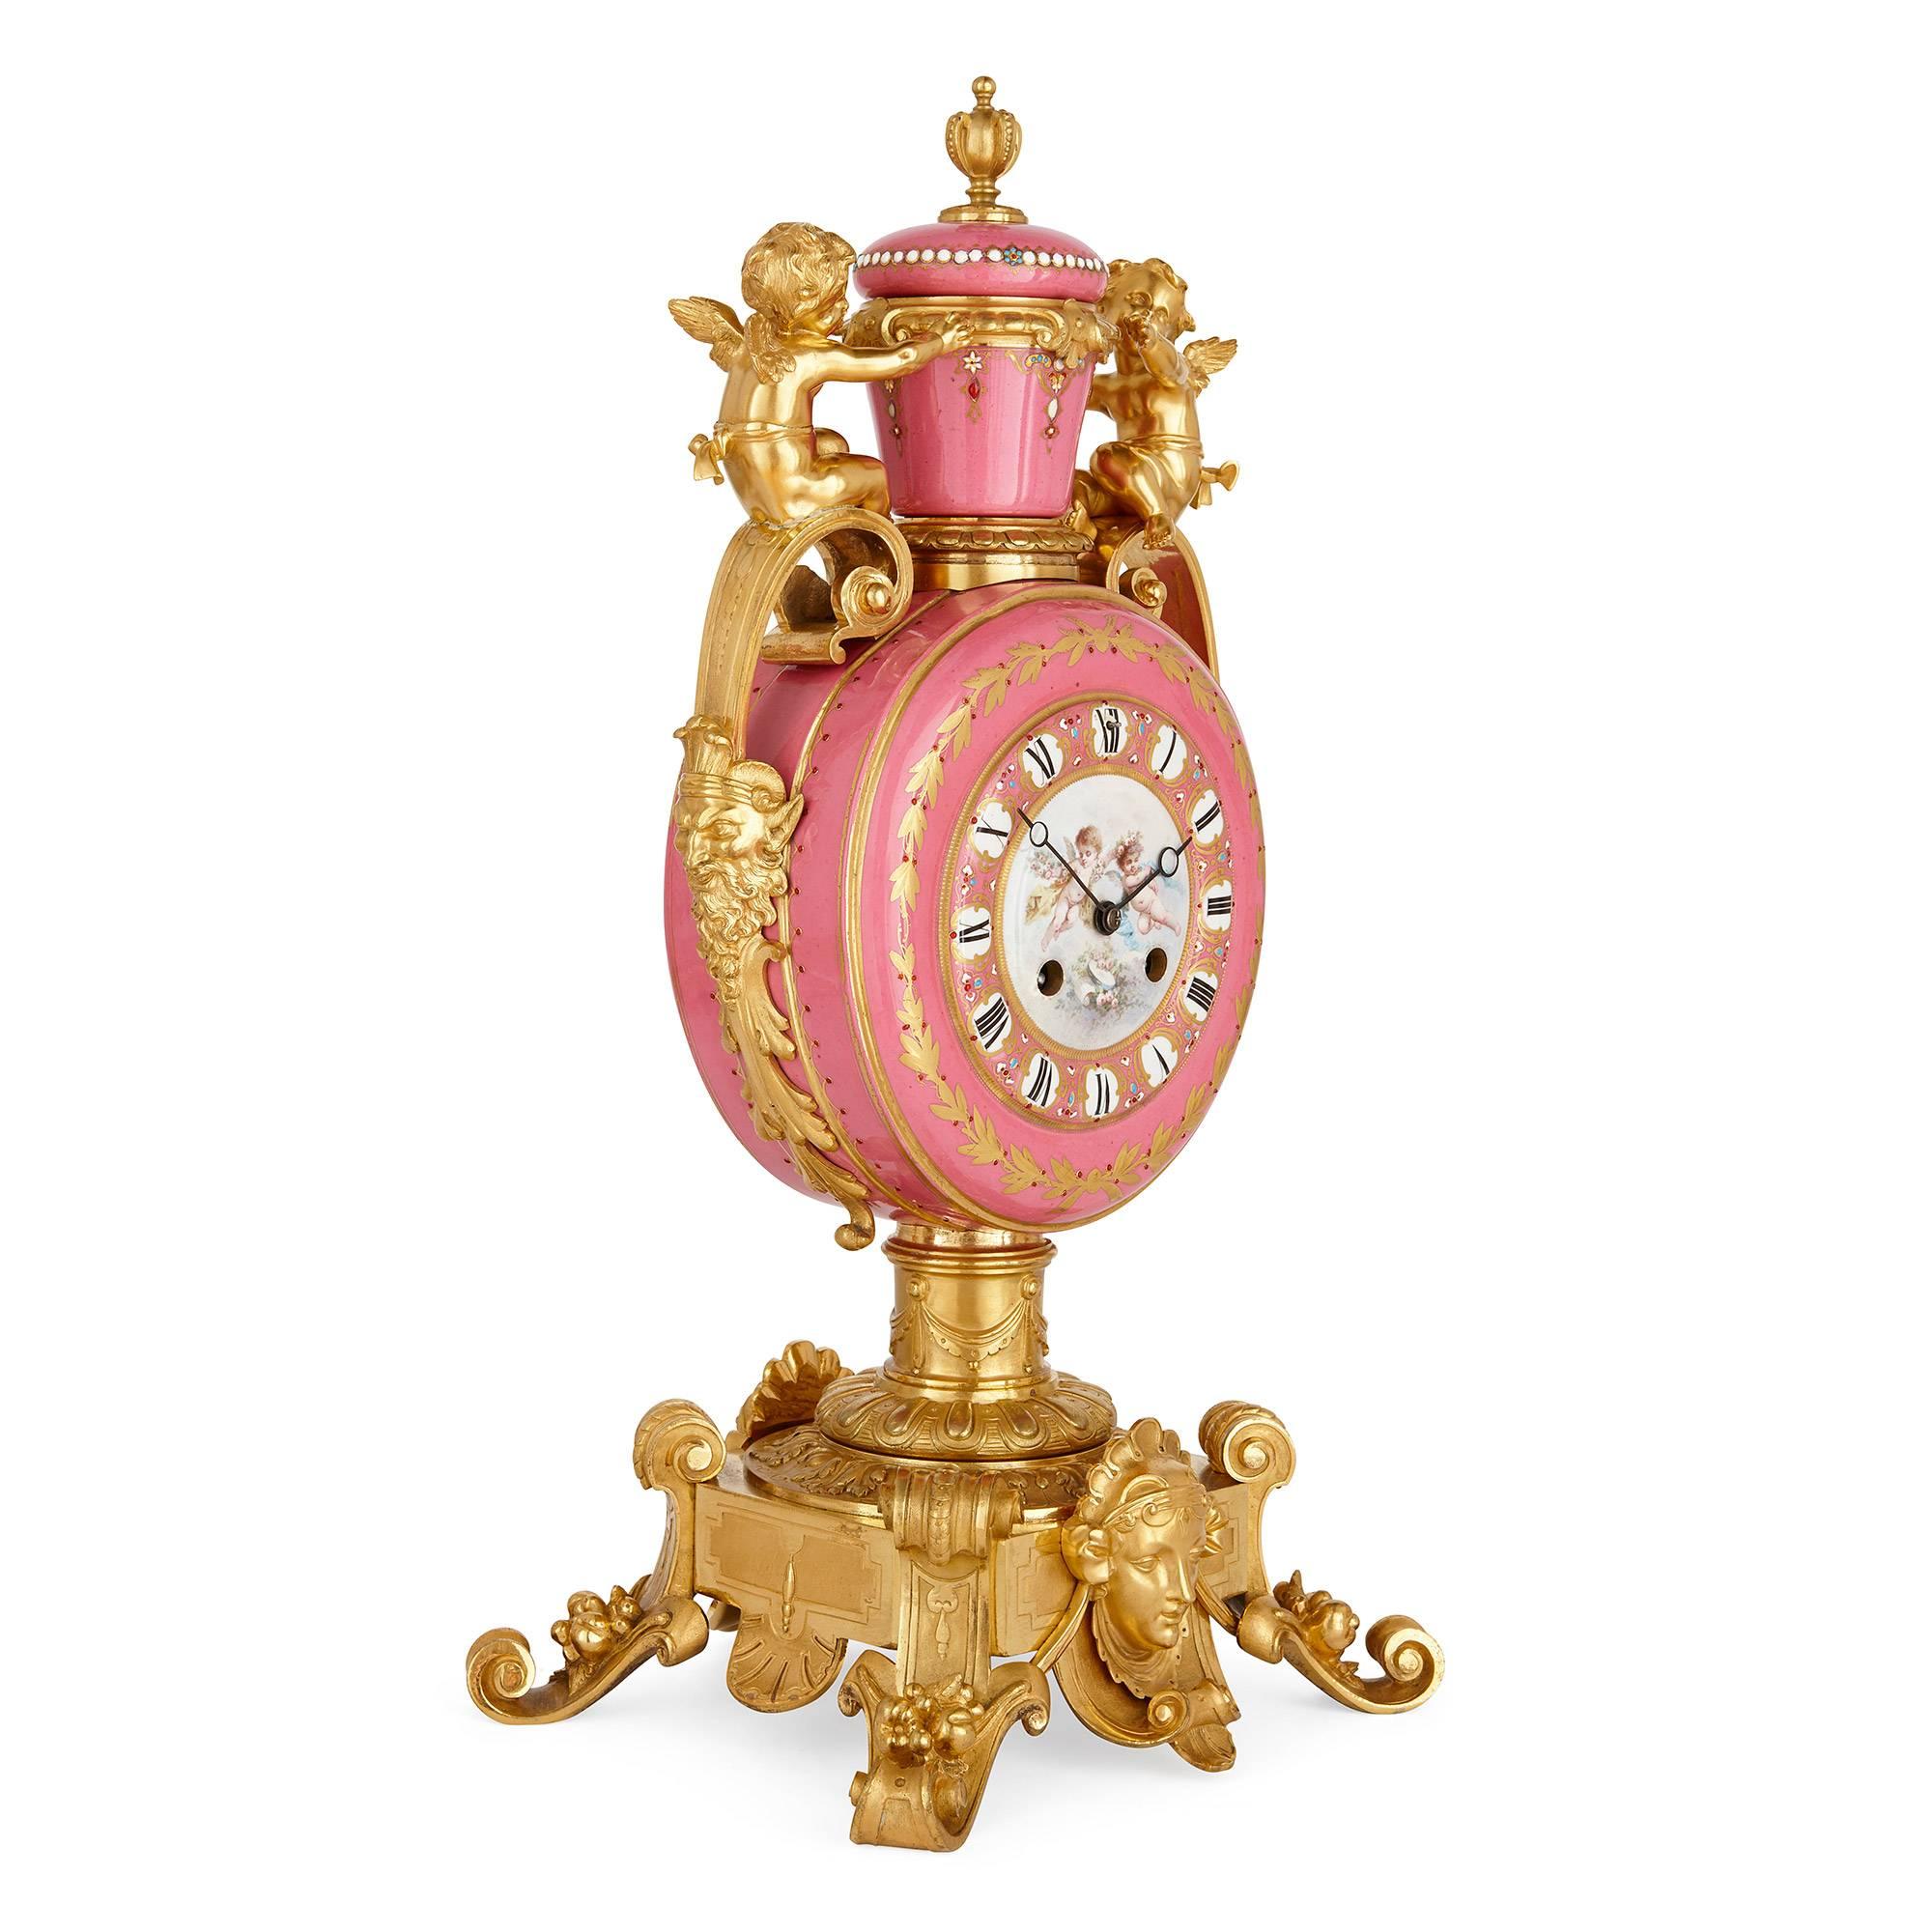 The magnificent neoclassical style clock set would make a beautiful addition to any elegant interior. 

The three-piece, antique French clock set comprising a central clock and a pair of flanking vases, all decorated in Sèvres style pink